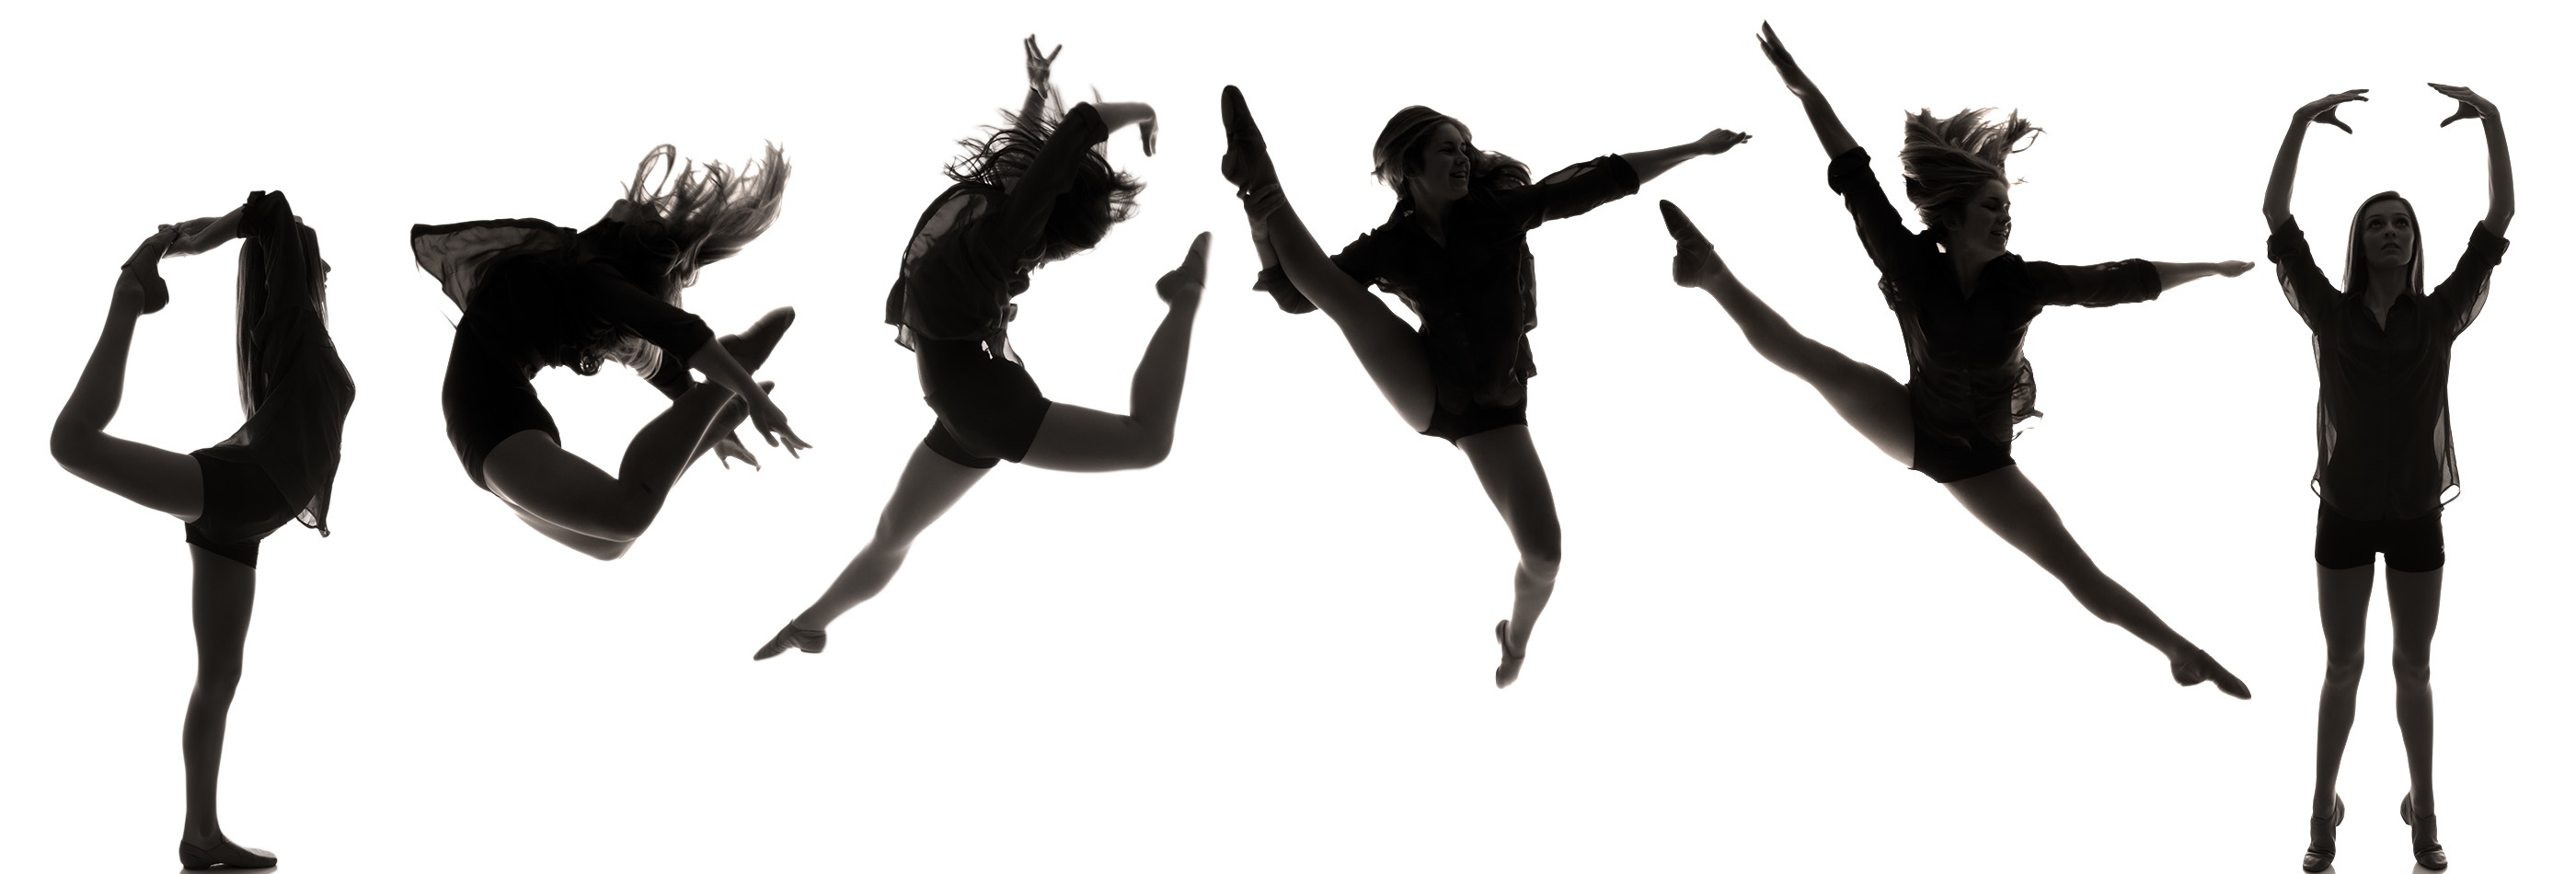 free dance clipart black and white - photo #34